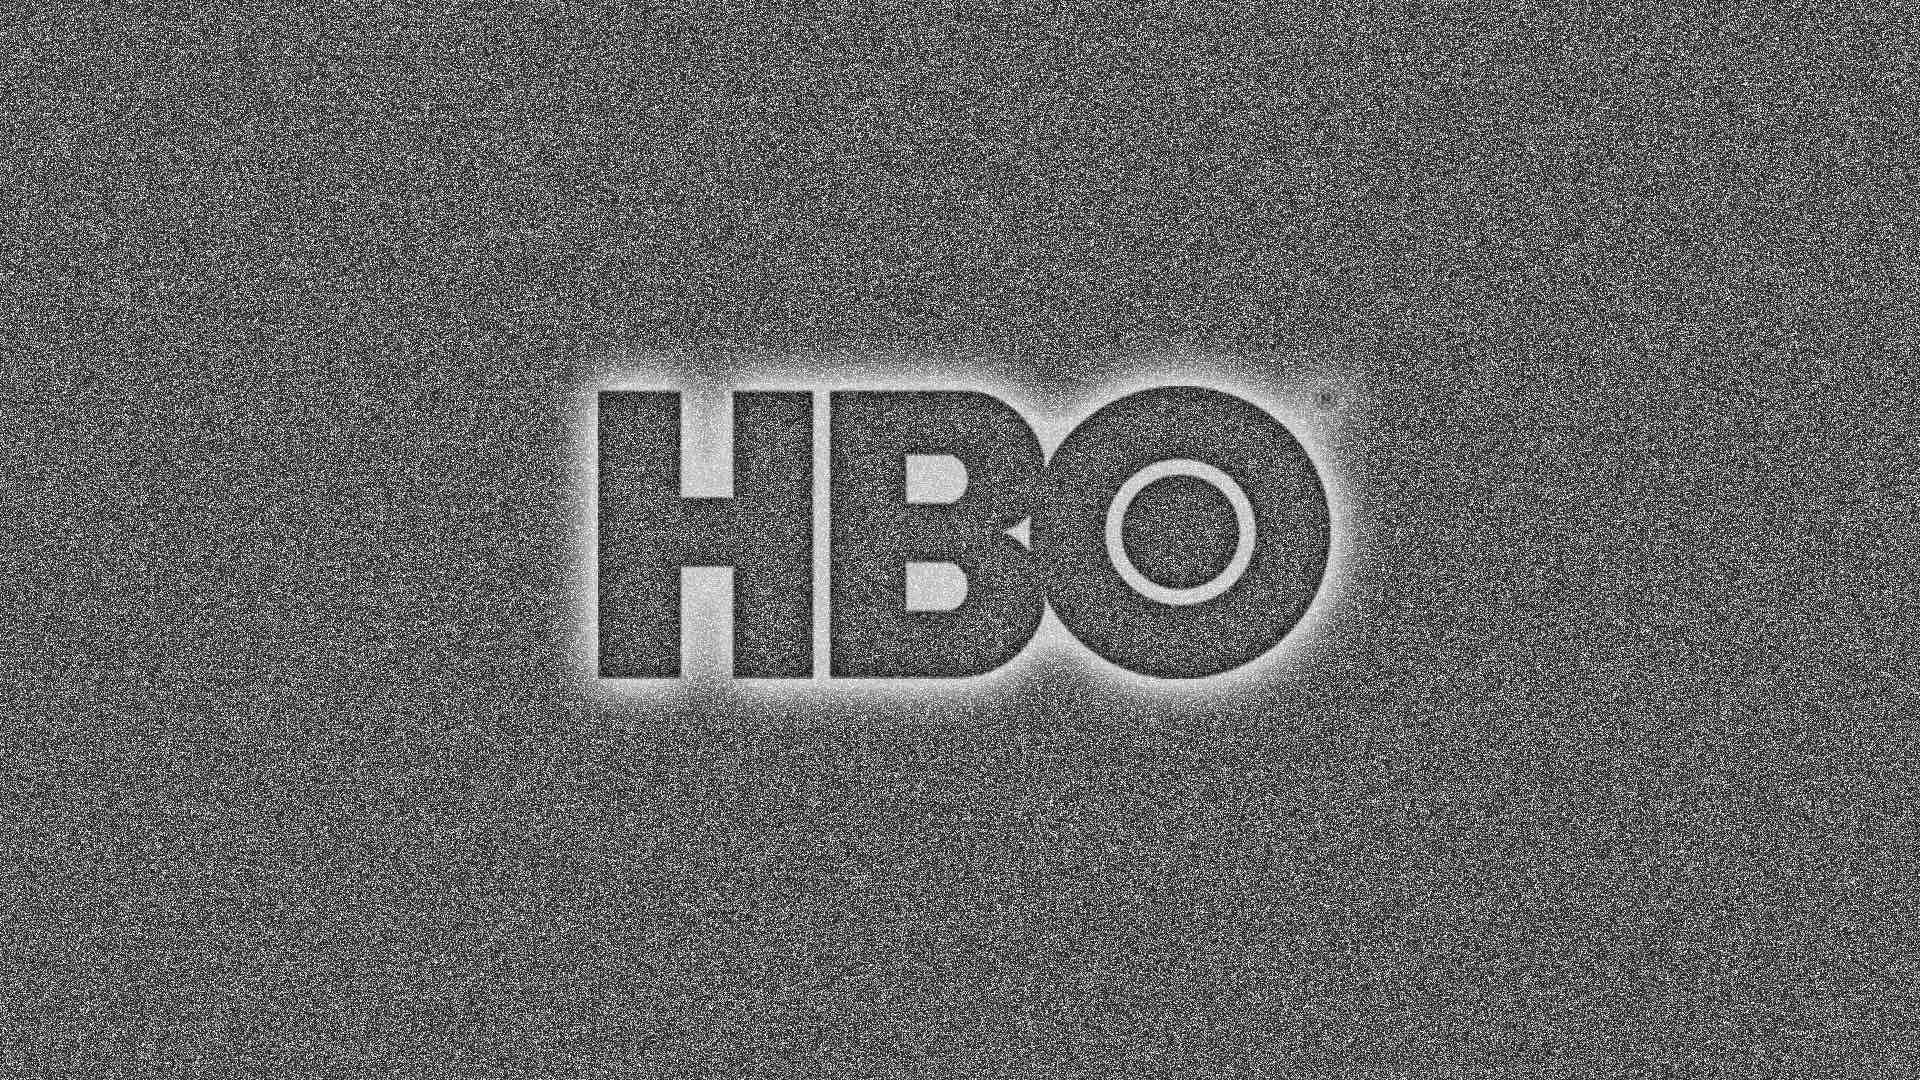 Watch Game of Thrones online legally HBO